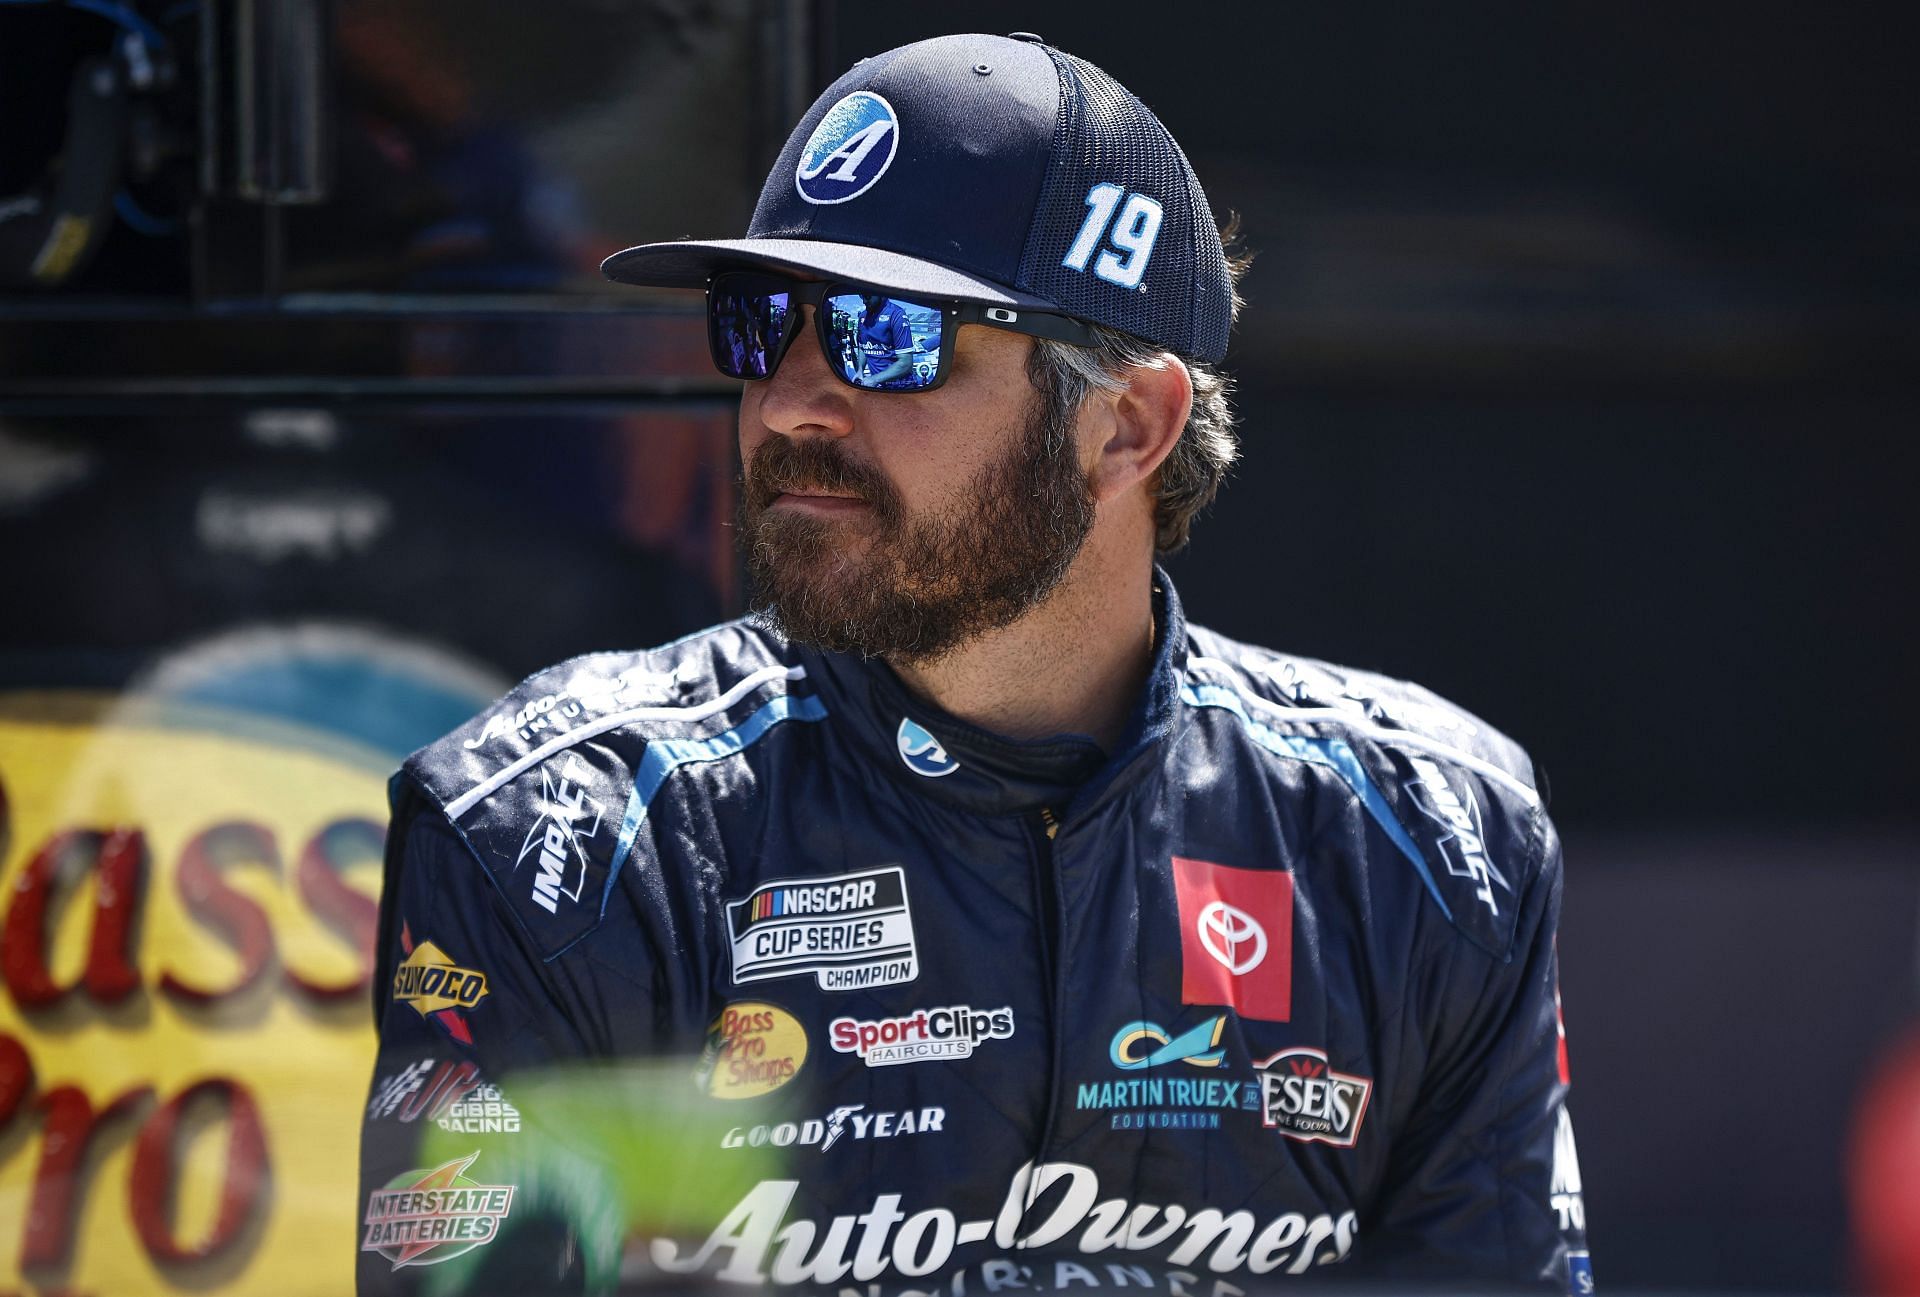 Martin Truex Jr. waits on the grid during practice for the 2022 NASCAR Cup Series FireKeepers Casino 400 at Michigan International Speedway in Brooklyn, Michigan. (Photo by Sean Gardner/Getty Images)